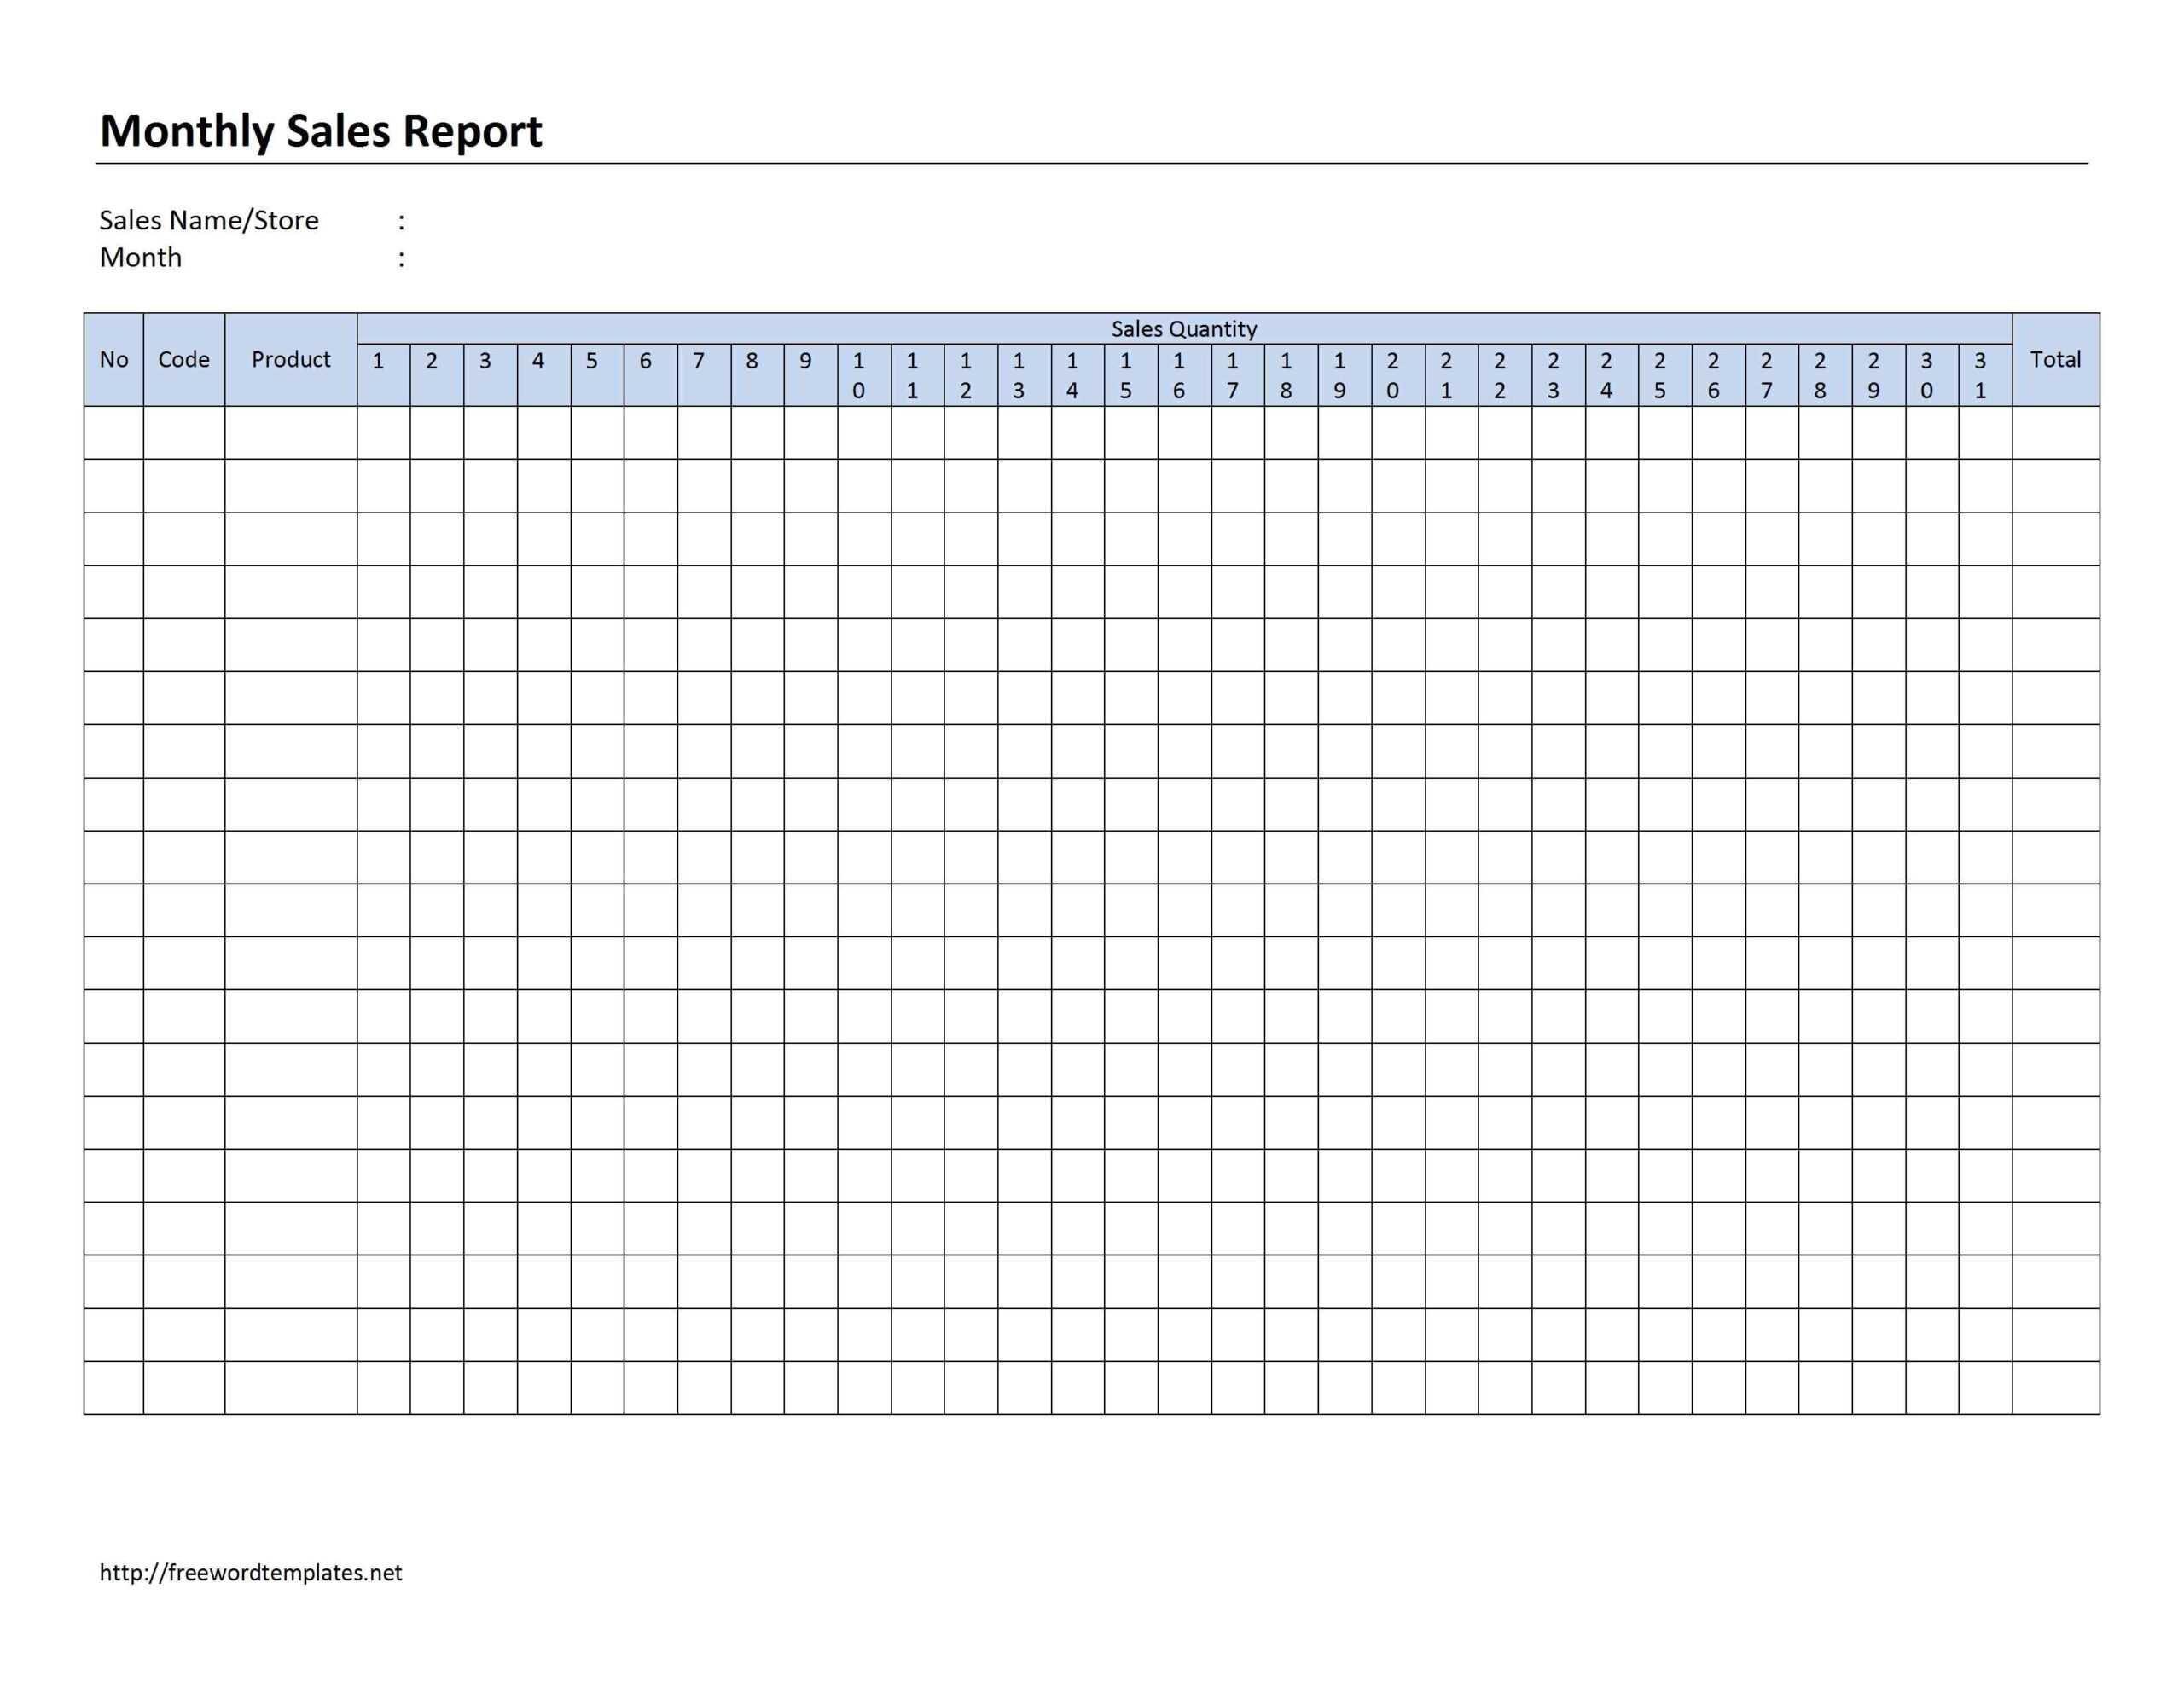 Replacethis] Monthly Sales Report Template And Form : V M D Pertaining To Sales Manager Monthly Report Templates